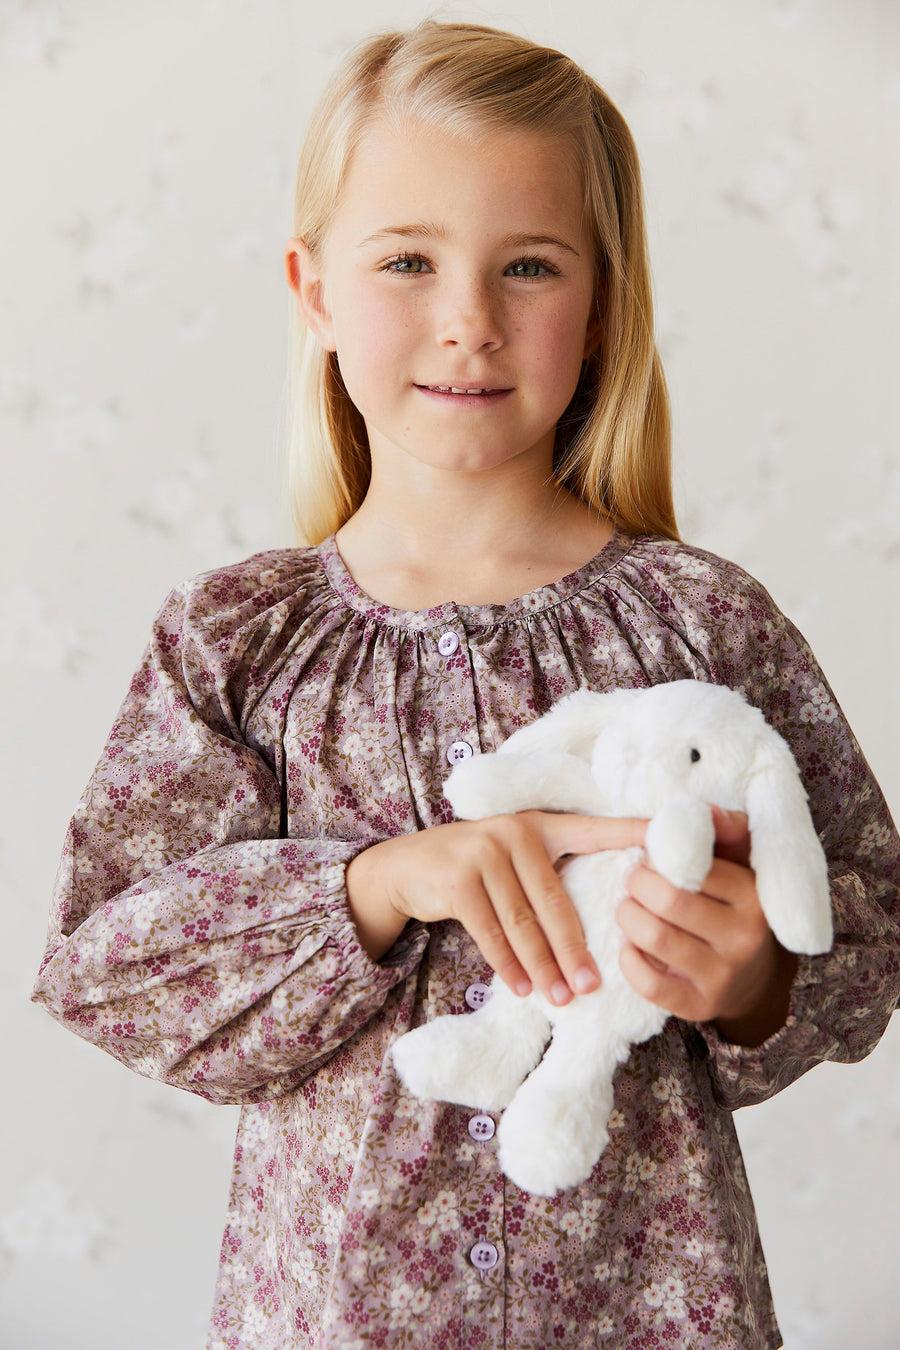 Organic Cotton Heather Blouse - Pansy Floral Fawn Childrens Top from Jamie Kay NZ